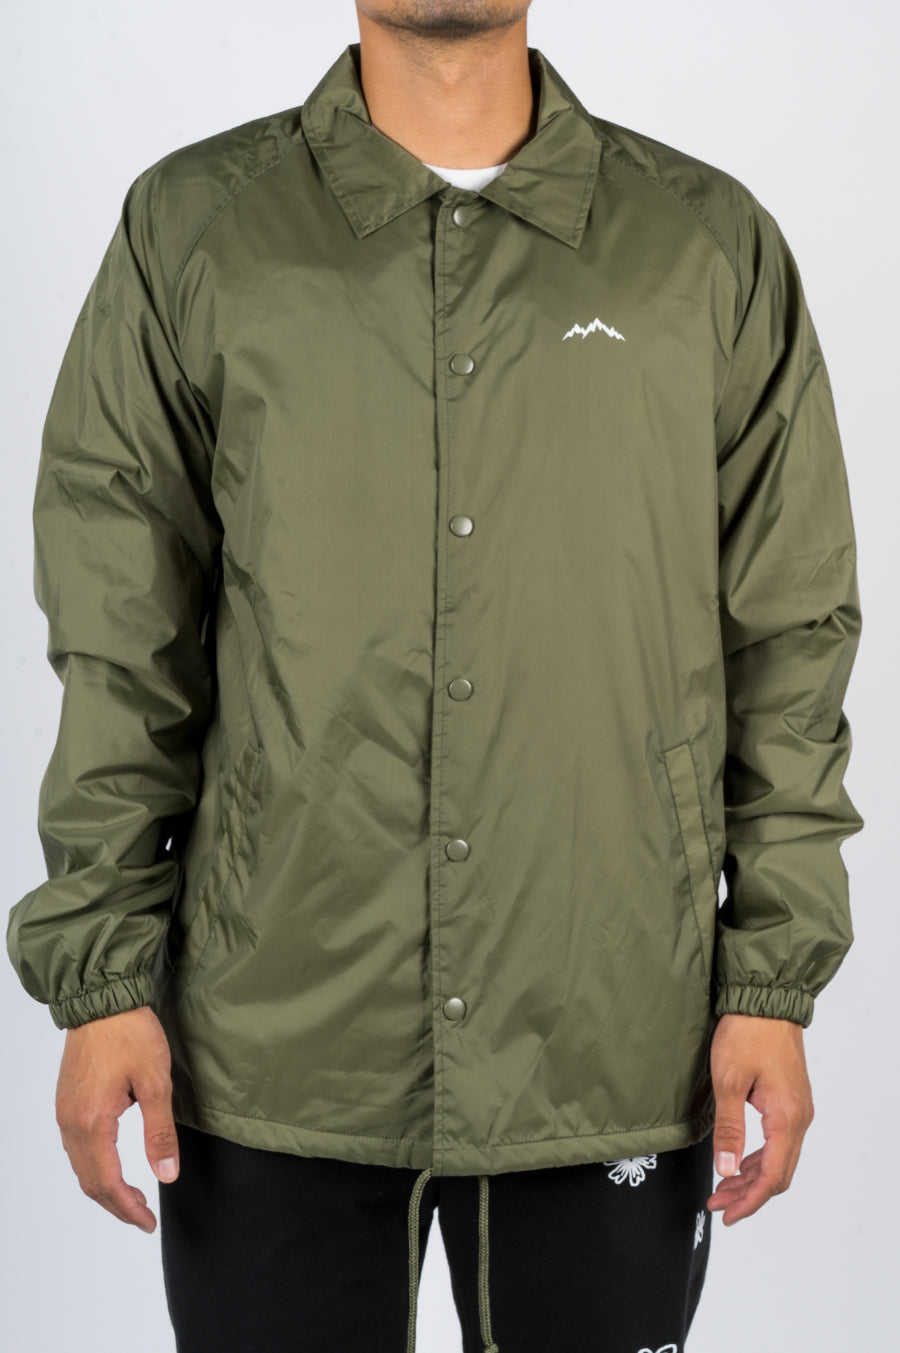 AFIELD OUT LANDSCAPE COACH JACKET ARMY GREEN - BLENDS